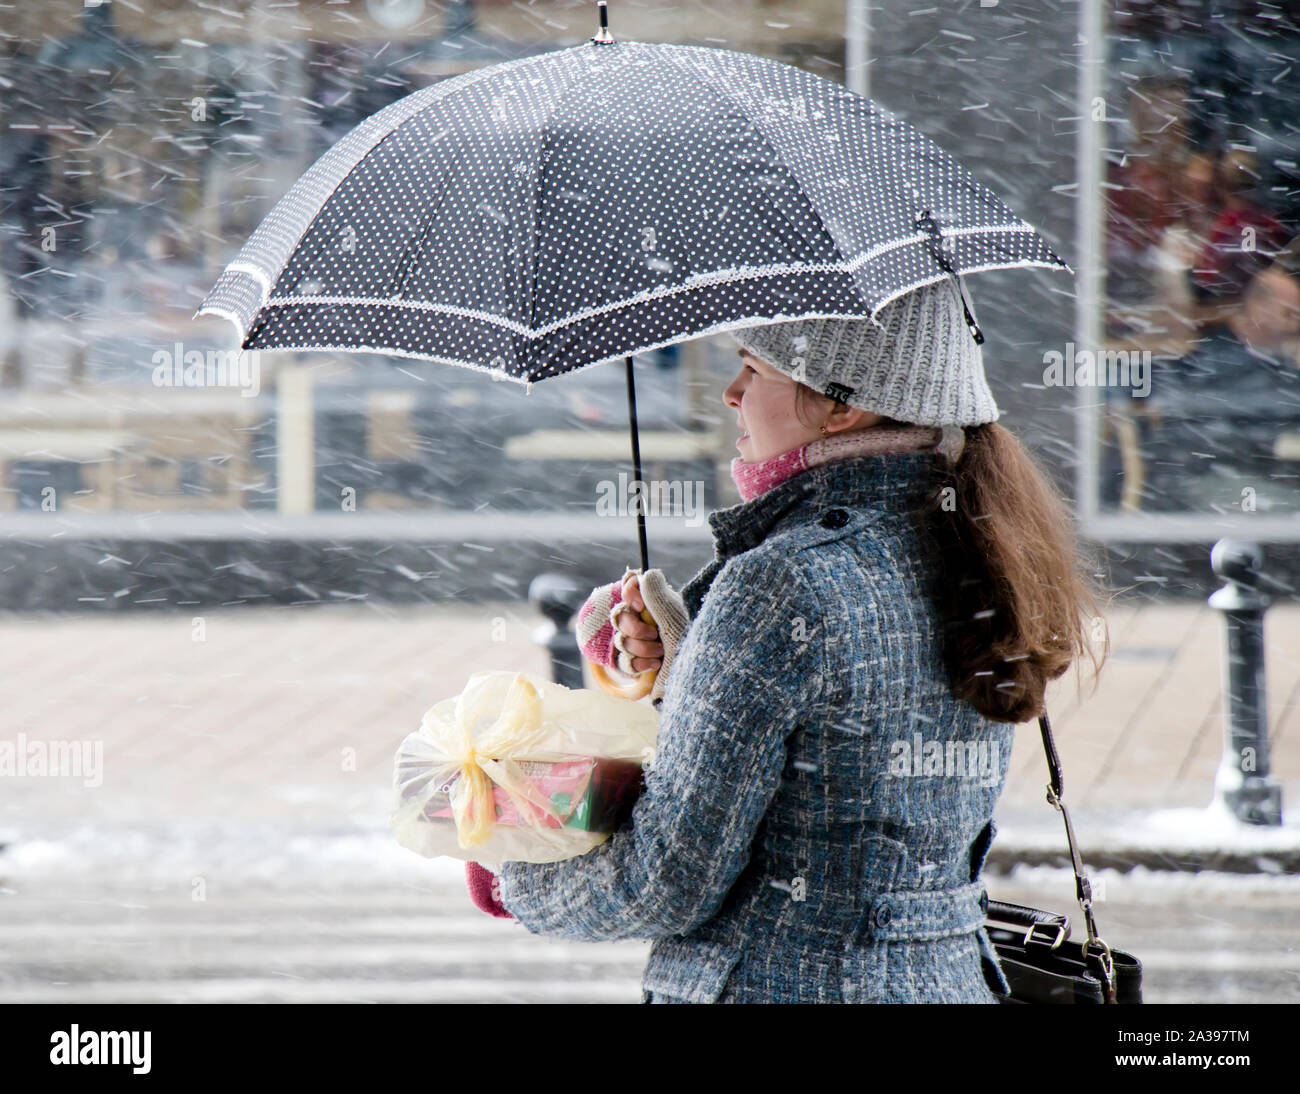 Belgrade, Serbia - January 3, 2019: One young teenage girl standing alone under umbrella on snowy winter city street , waiting, in profile view Stock Photo